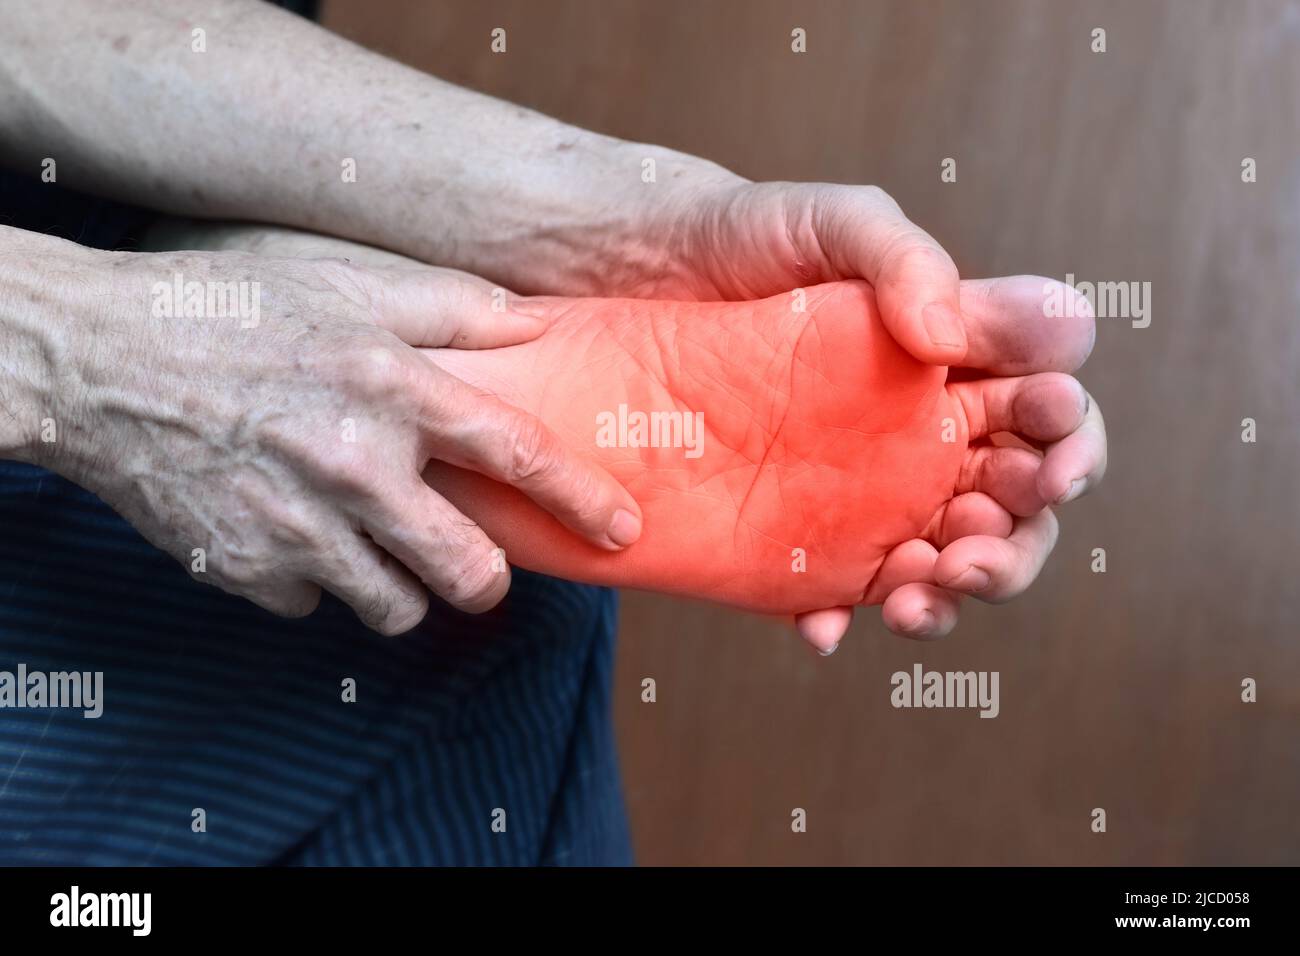 Tingling and burning sensation in foot of Asian old man with diabetes. Foot pain. Sensory neuropathy problems. Foot nerves problems. Plantar fasciitis Stock Photo